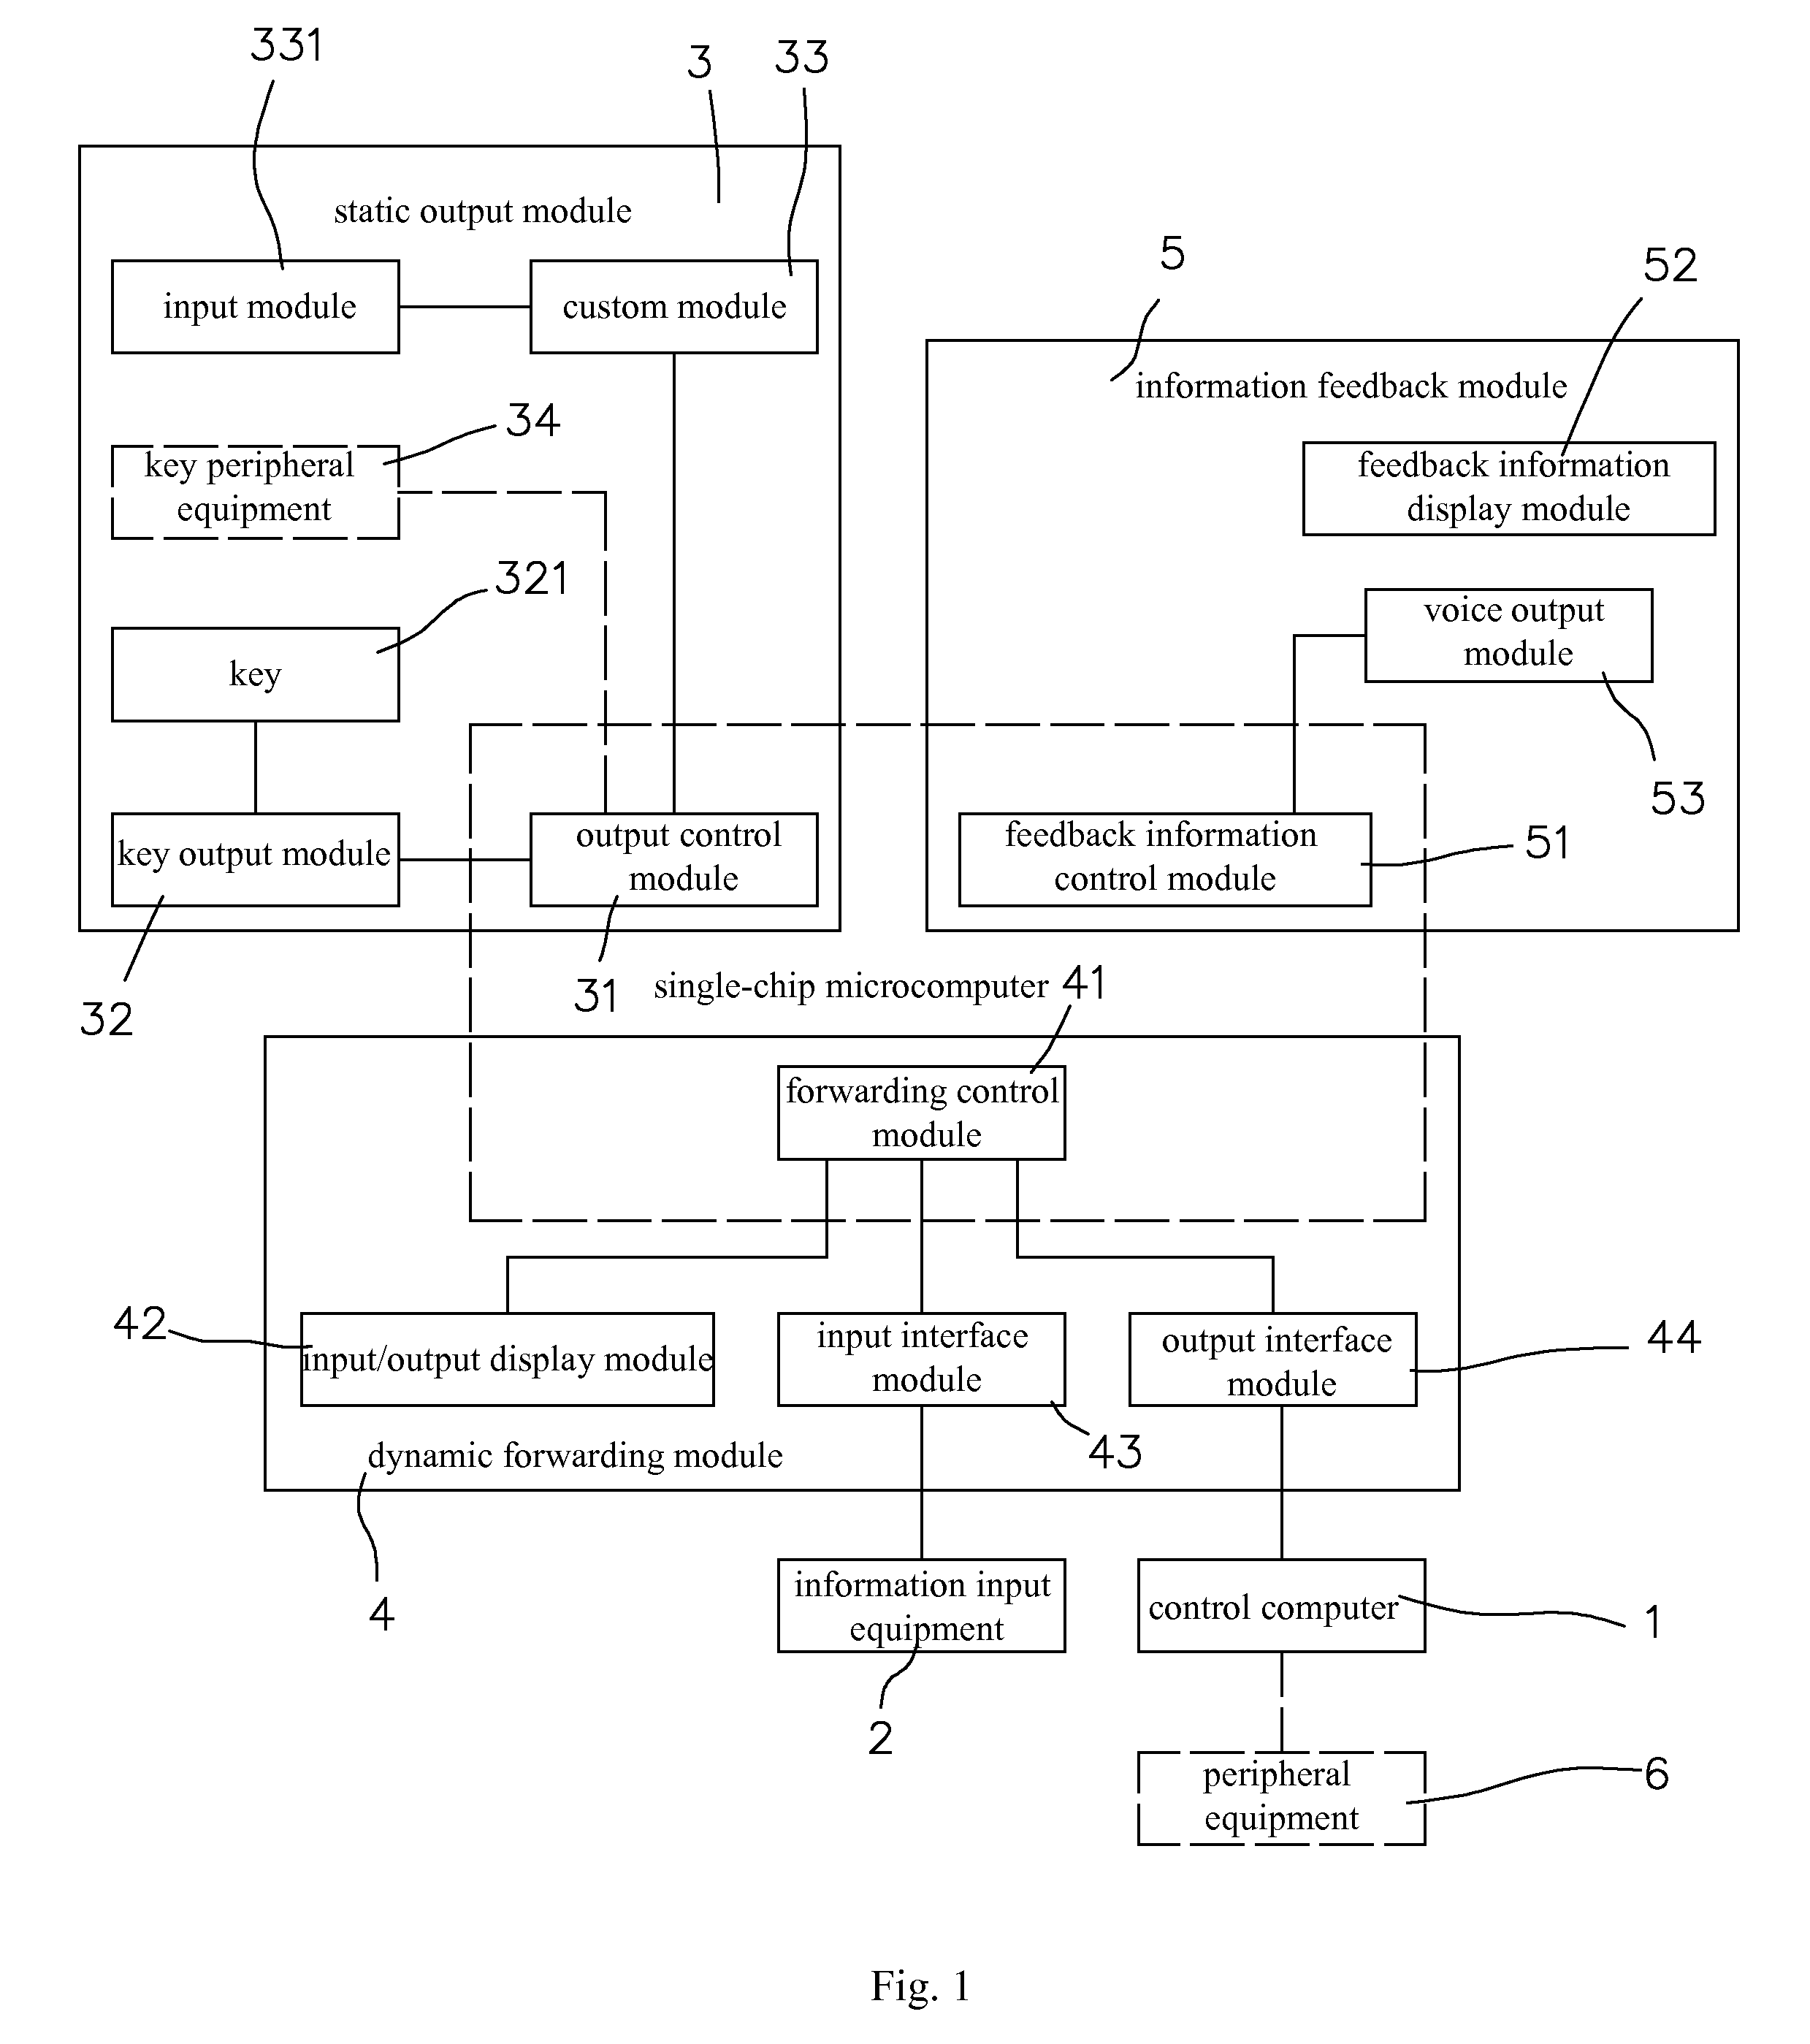 Automated network triggering-forwarding device